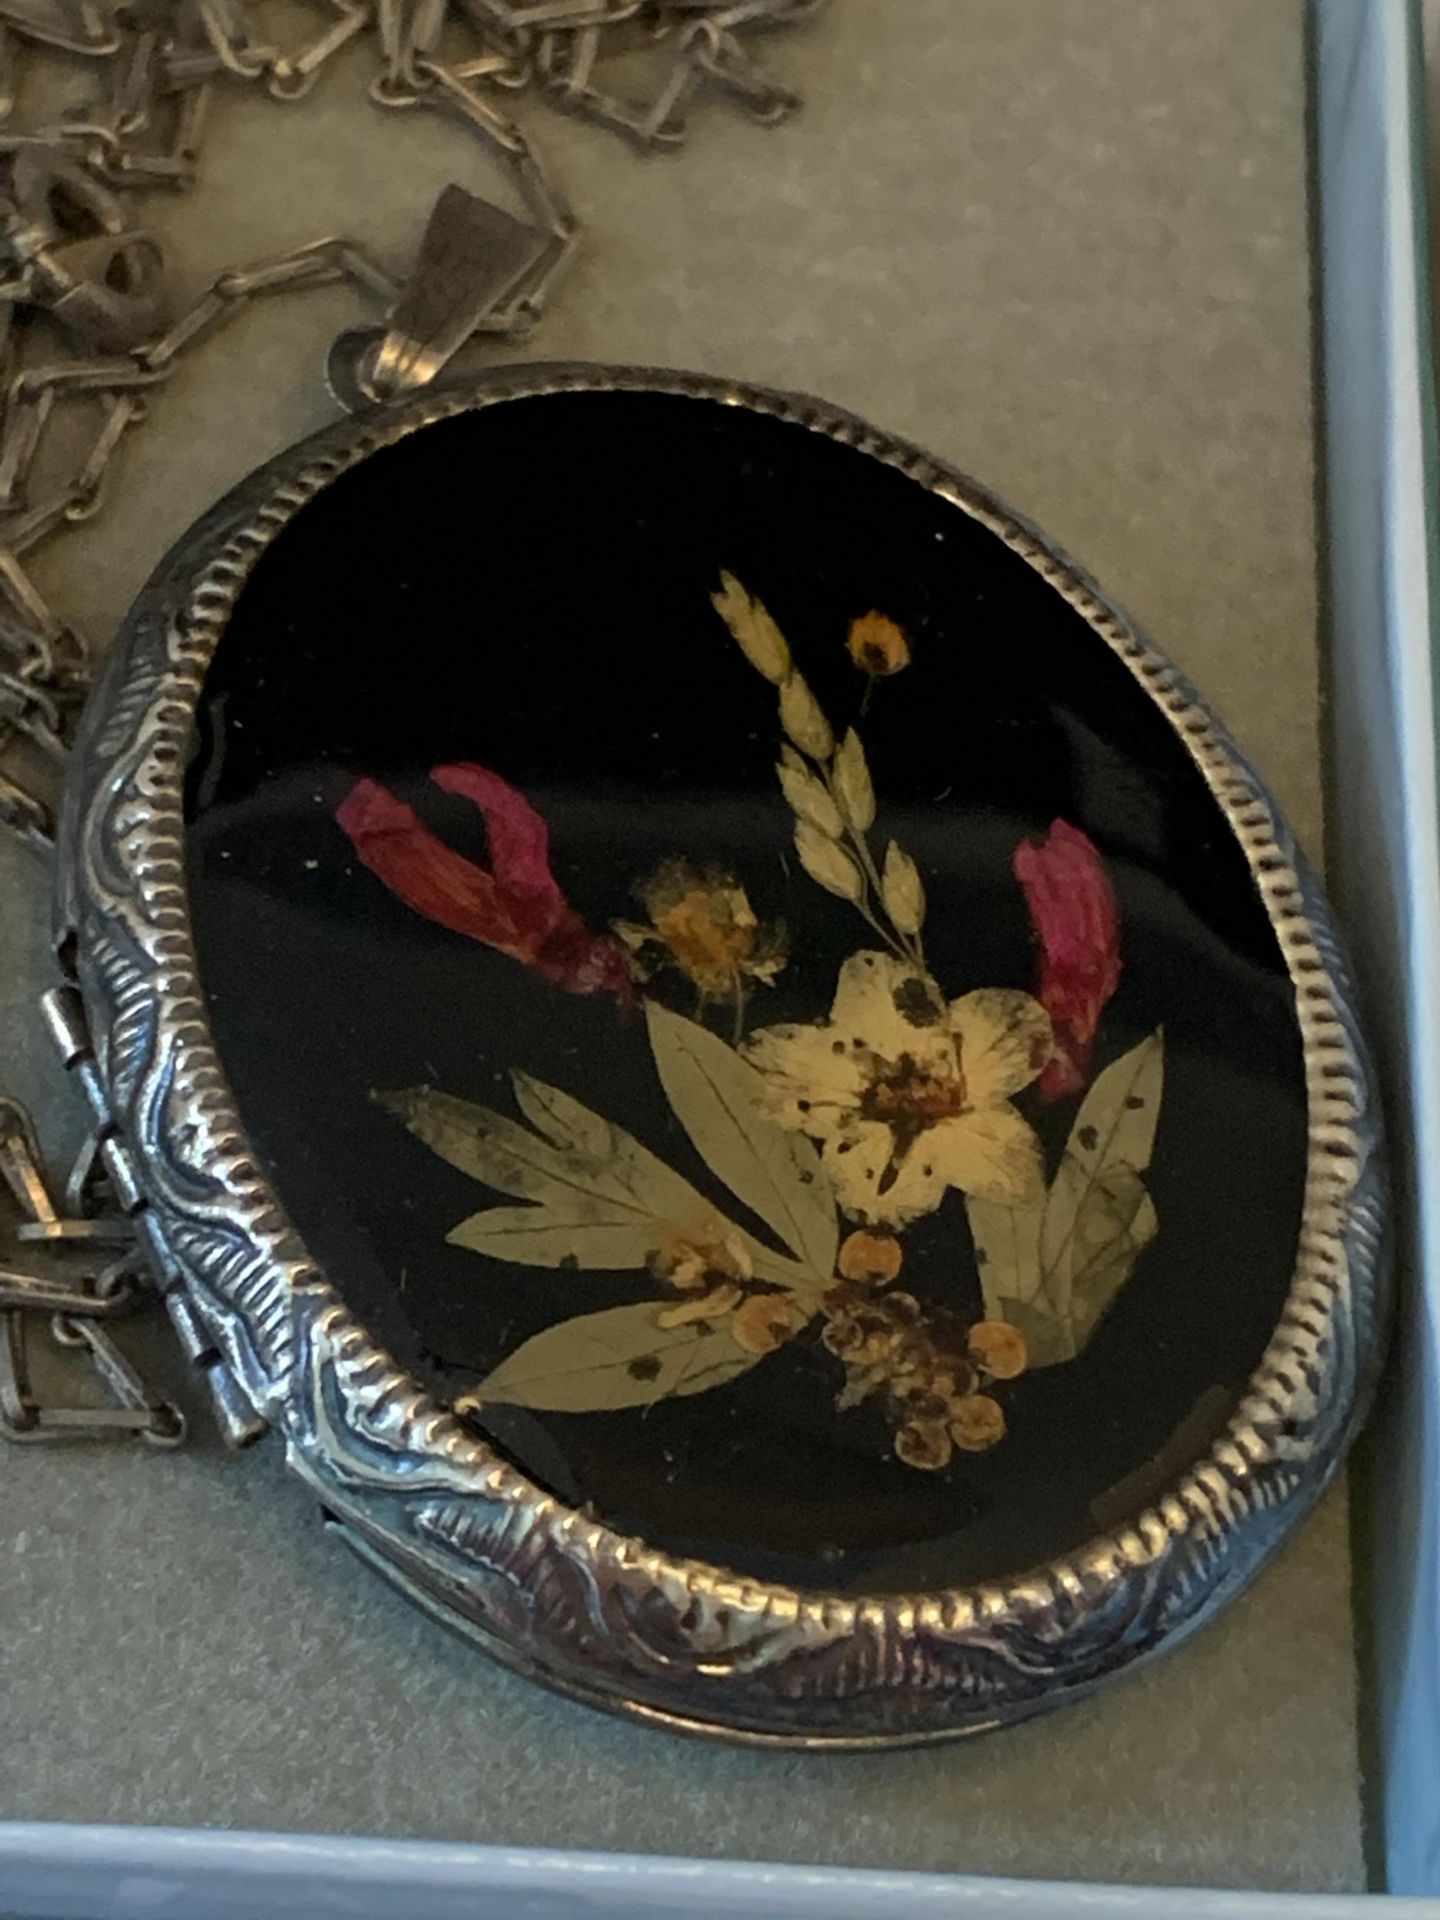 FOUR FRENCH PRESSED FLOWER LOCKETS TWO LARGE AND TWO SMALL ALL IN PRESENTATION BOXES - Image 2 of 6